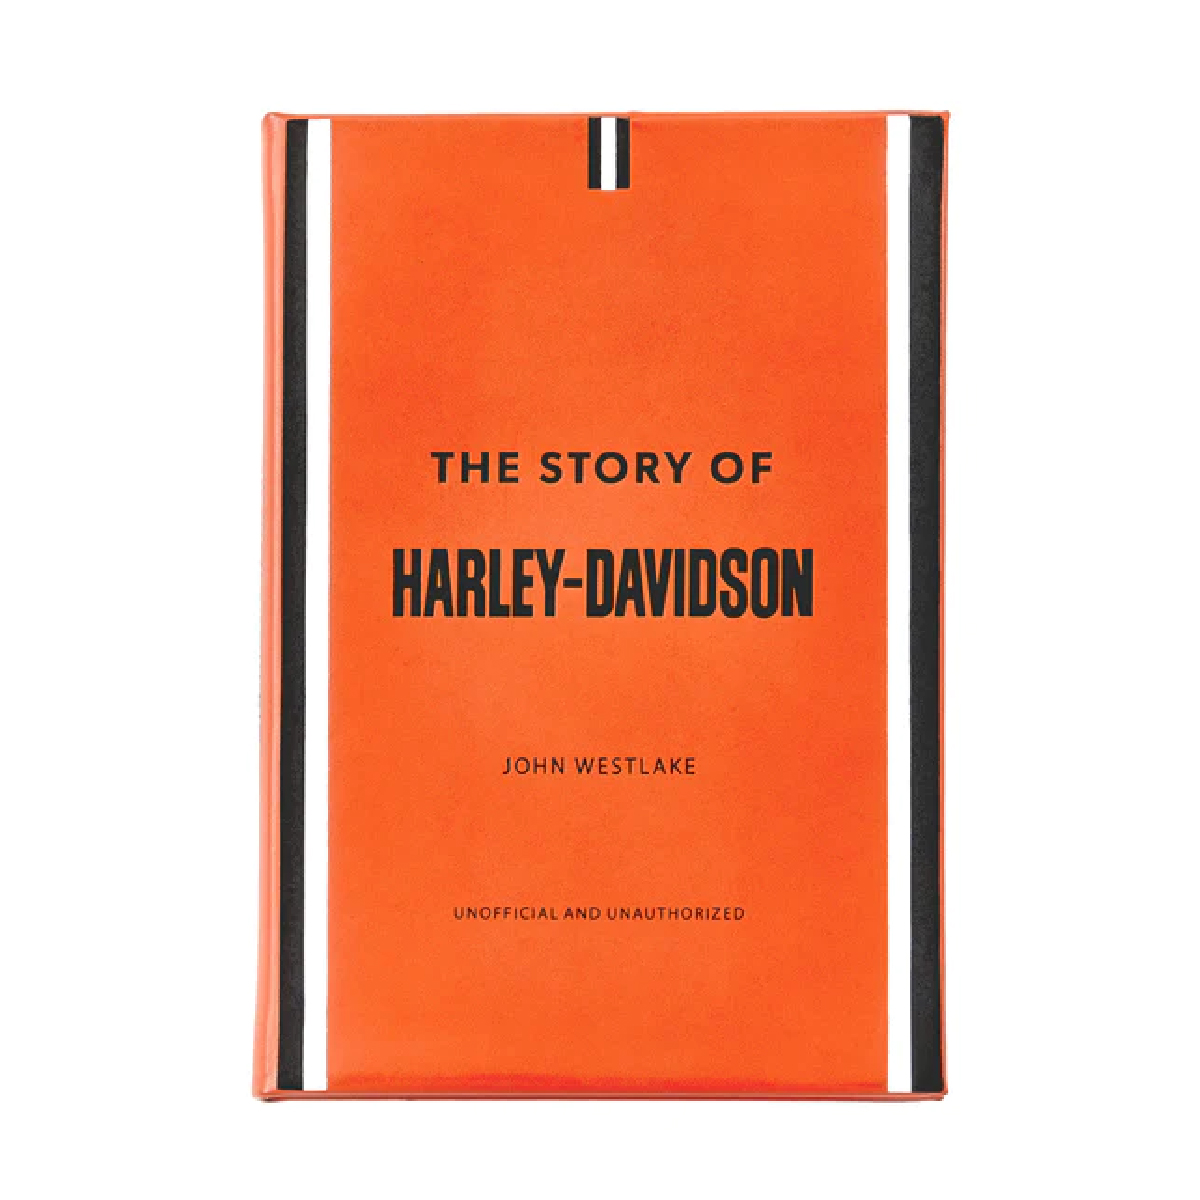 Graphic Image - "The Story of Harley-Davidson" by James Westlake